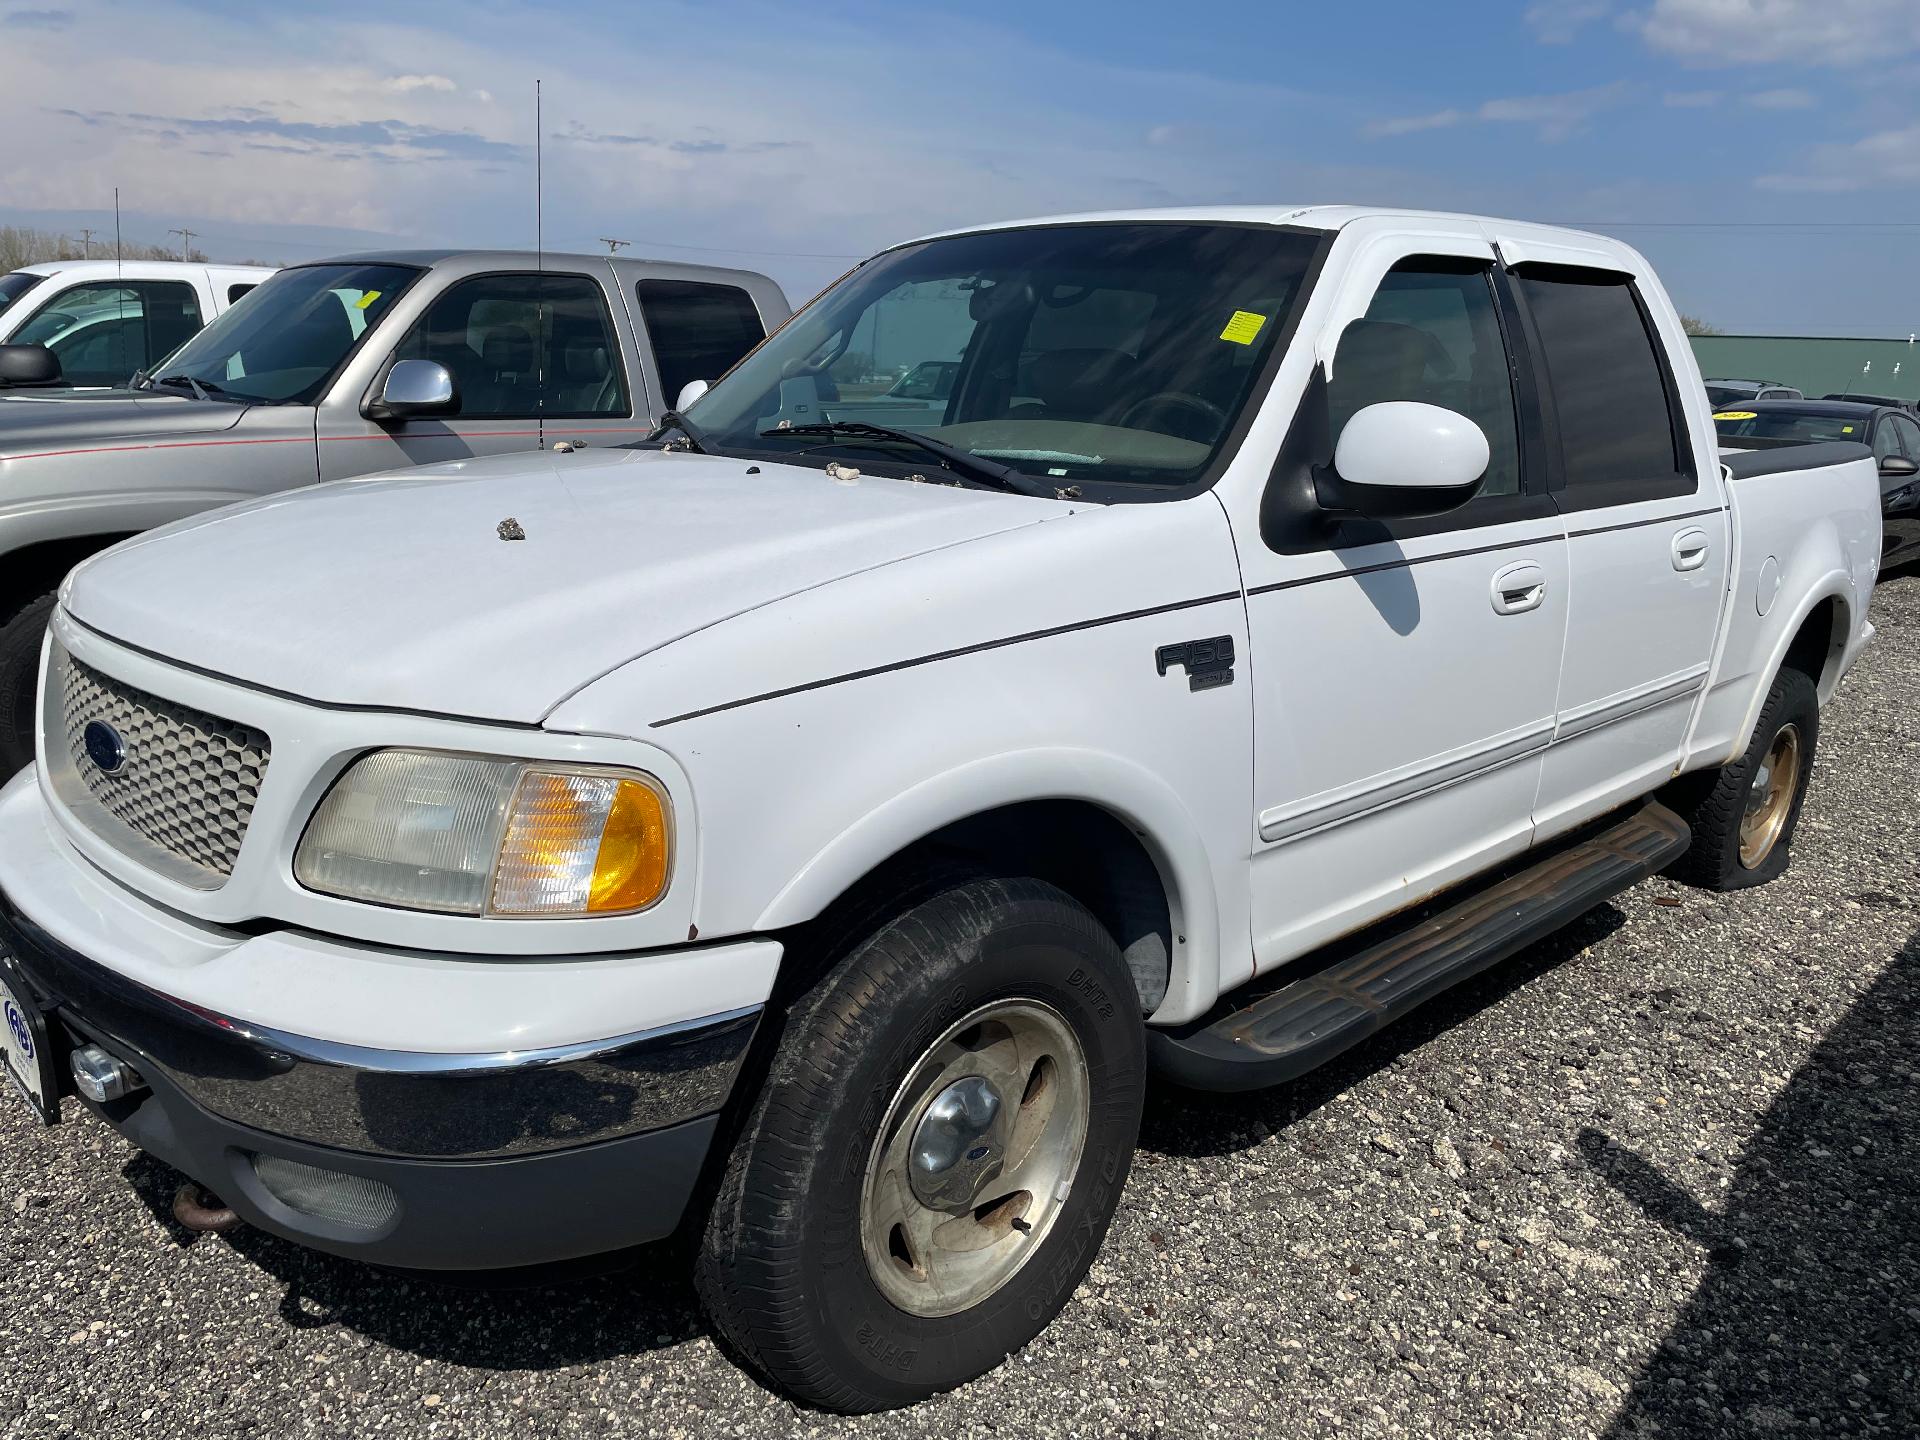 Used 2001 Ford F-150 XLT with VIN 1FTRW08L51KF66553 for sale in Genoa, IL